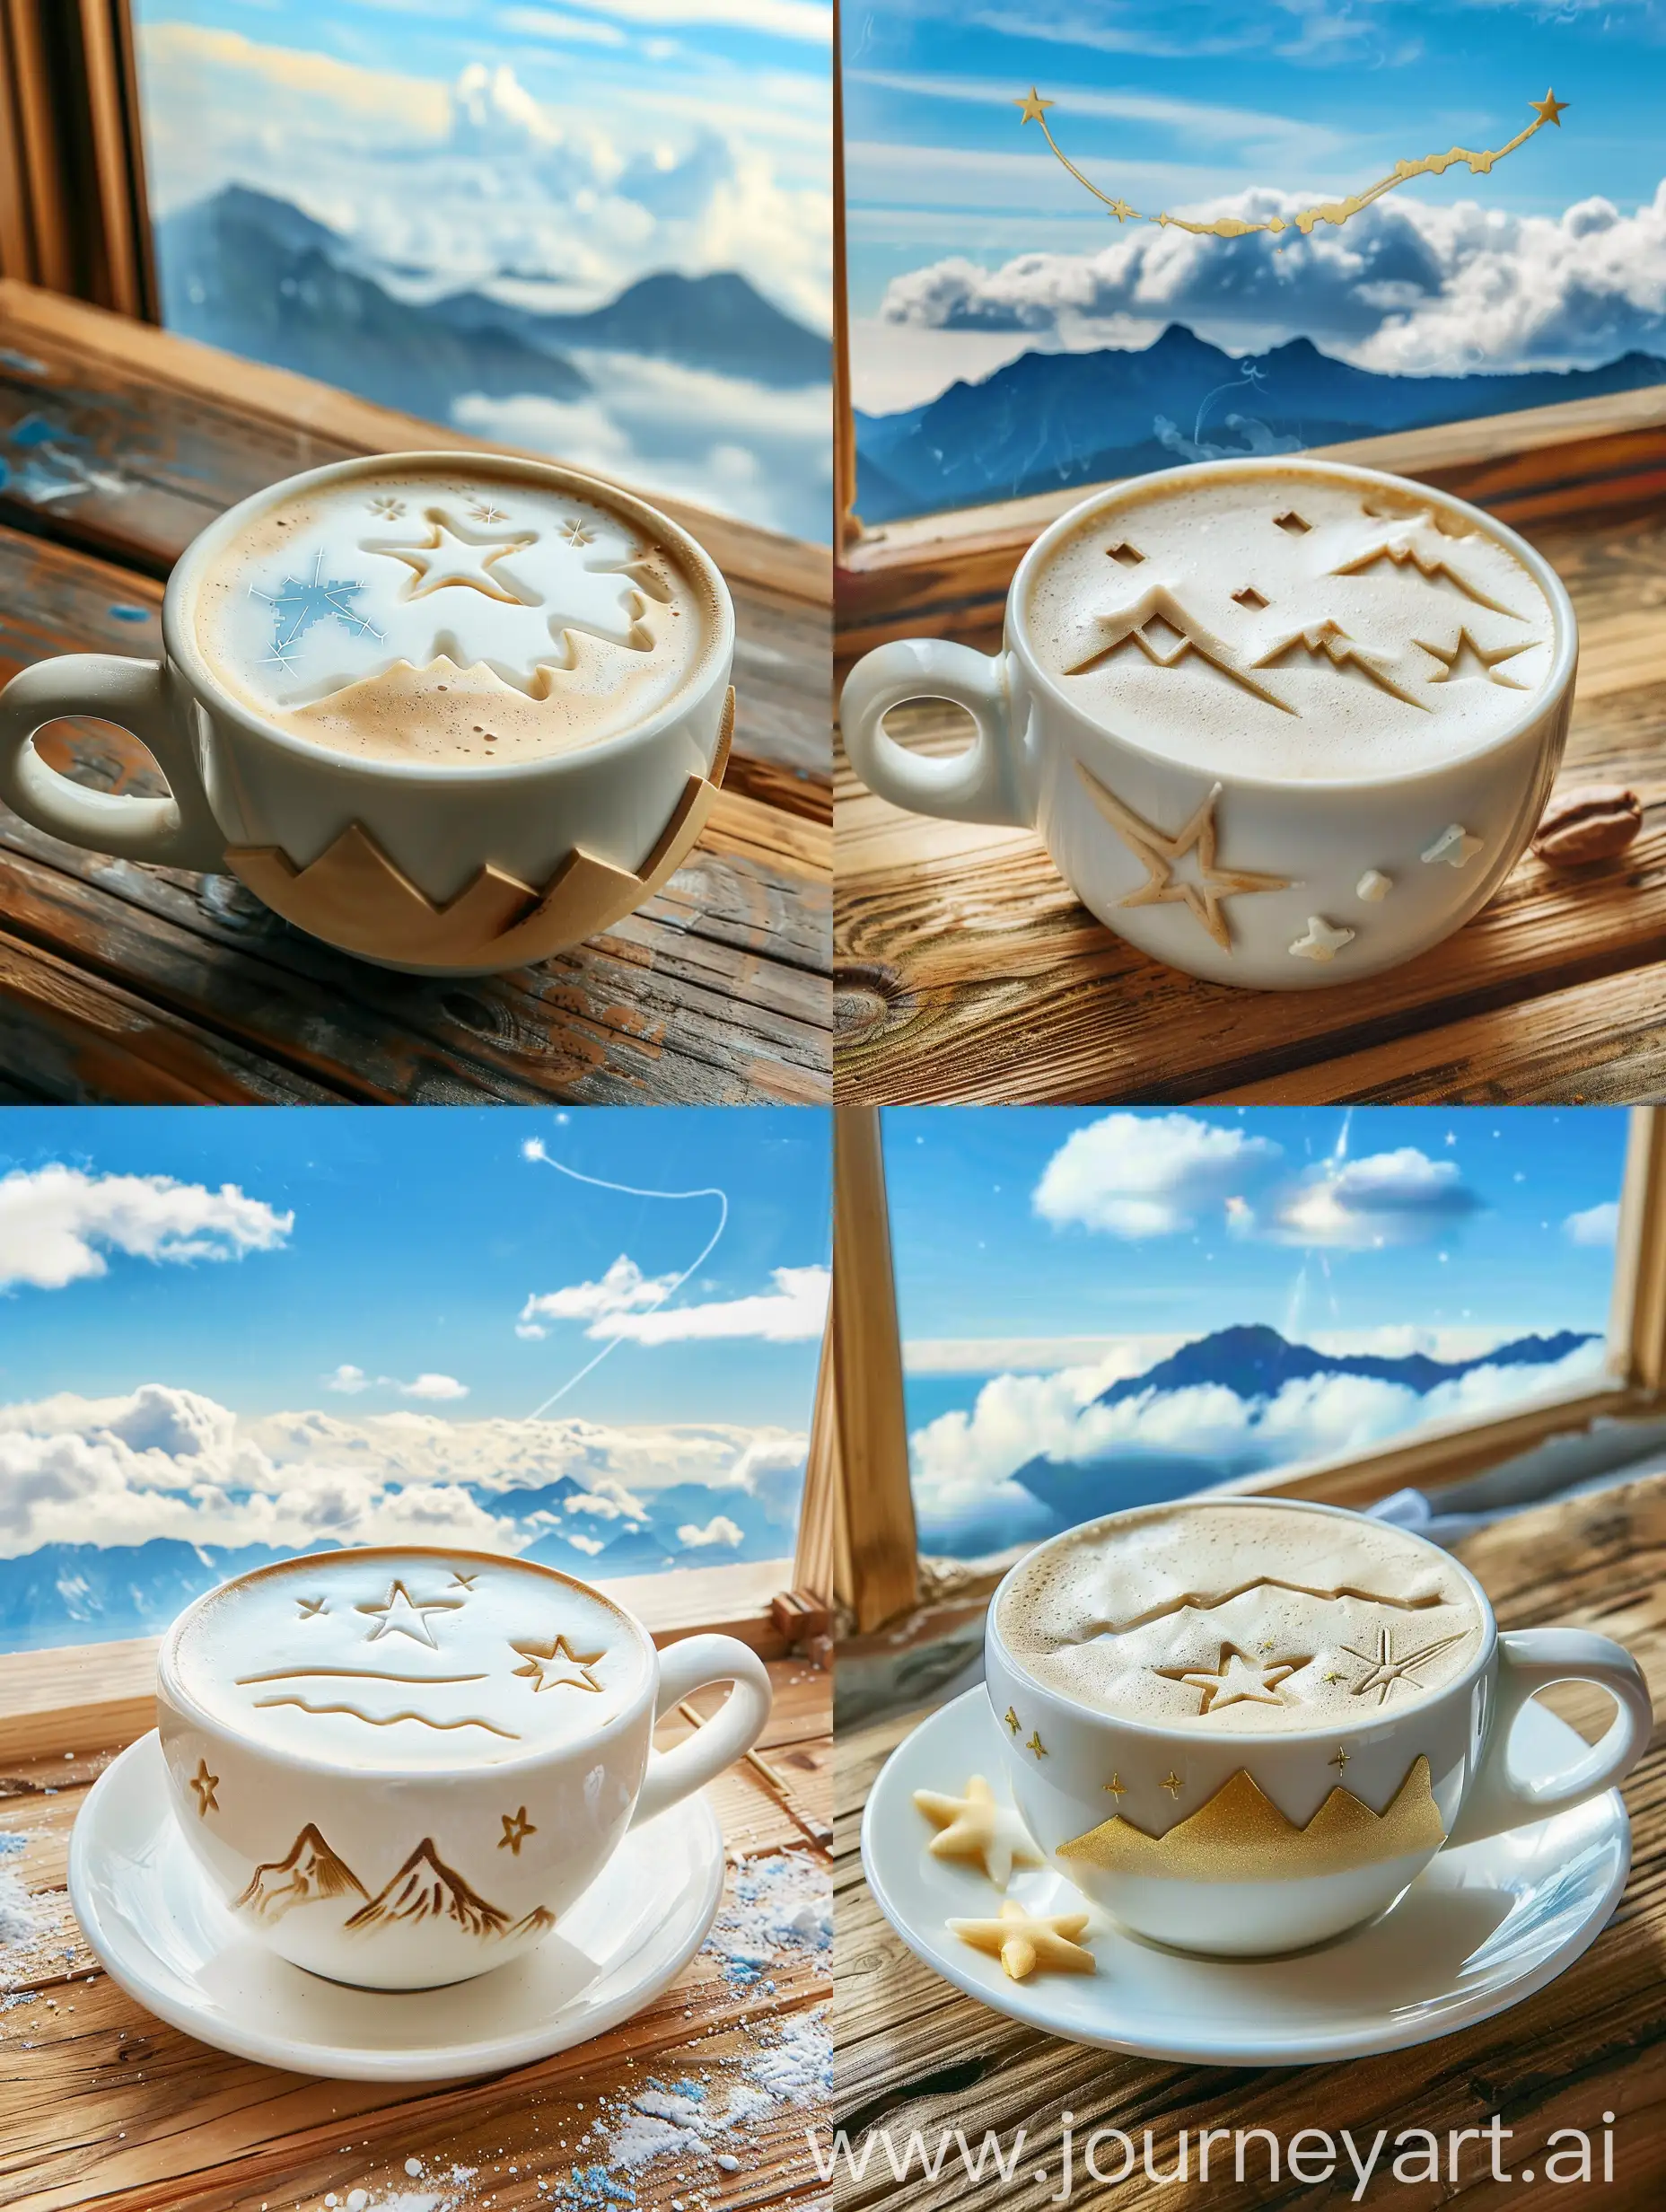 Artistic-Cappuccino-with-Mountain-and-Star-Milk-Art-on-Wooden-Table